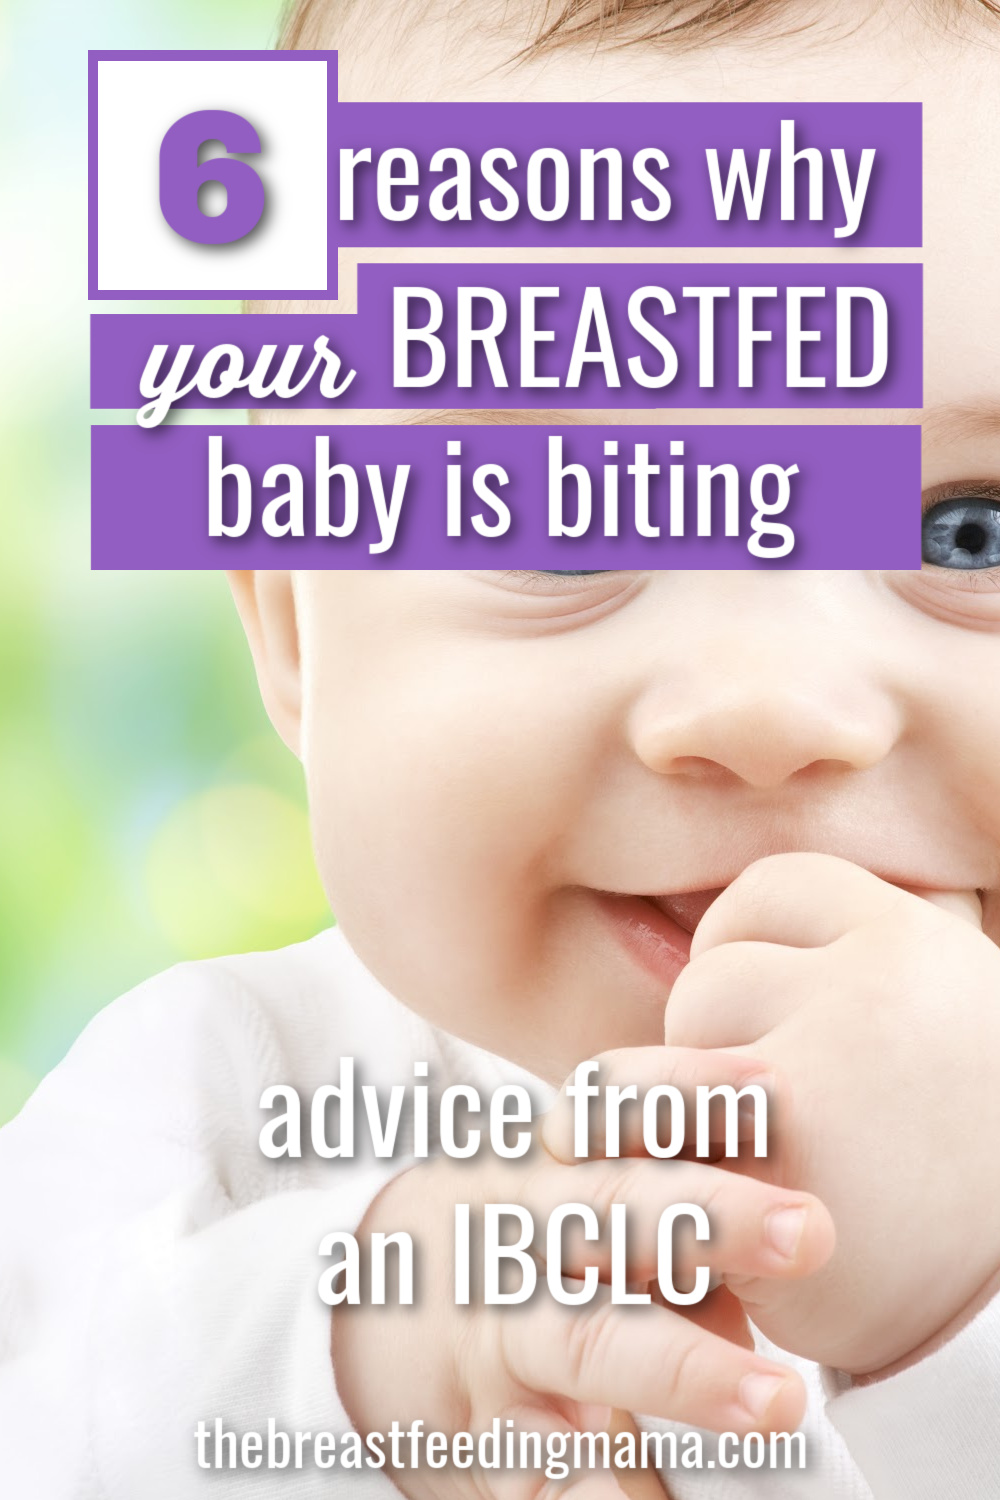 Why Is My Baby Biting While Breastfeeding?